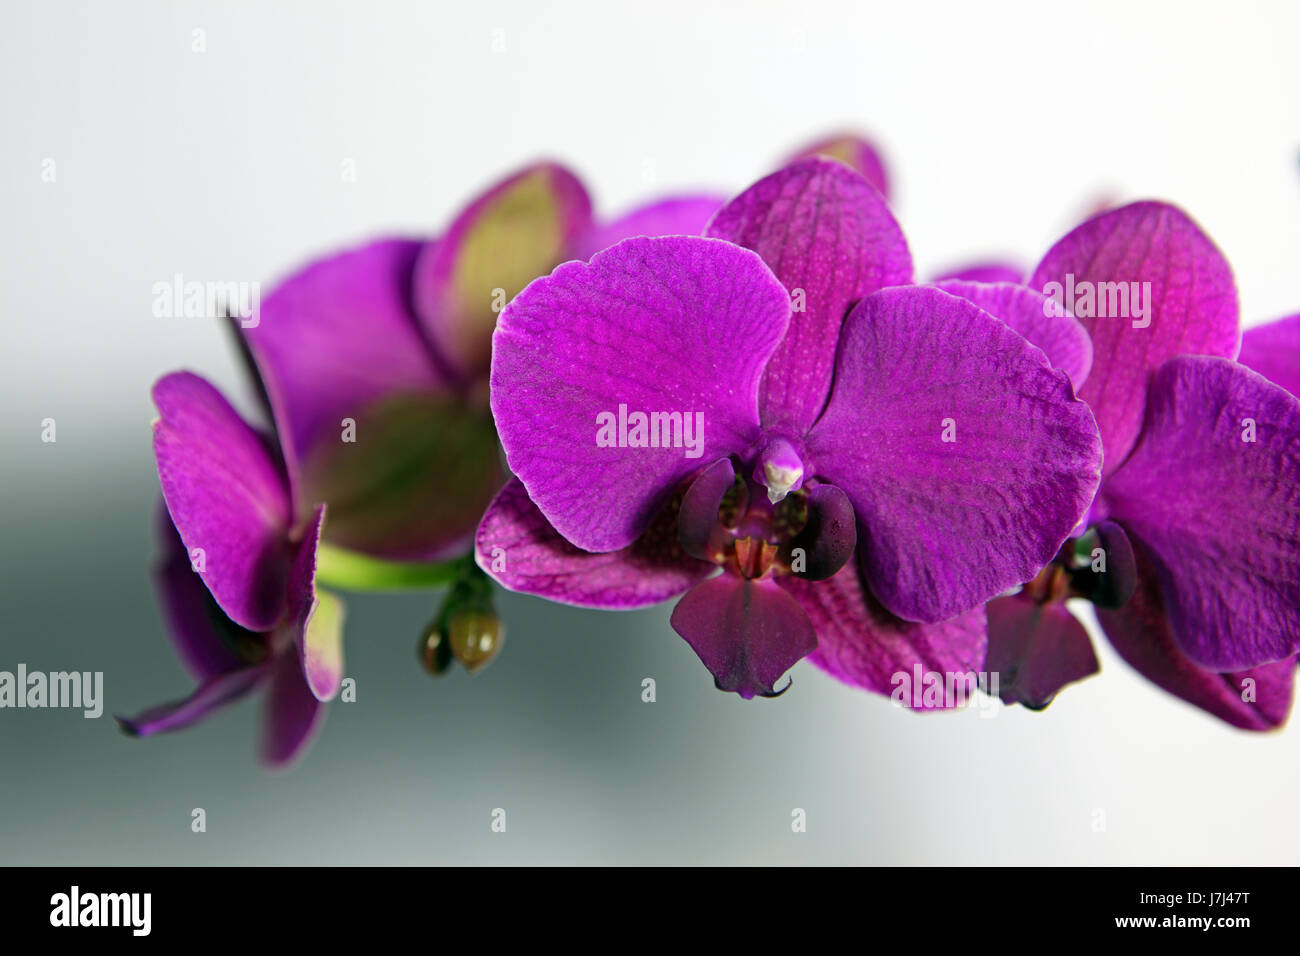 plant flower flowers orchid plant flower flowers purple orchid orchids Stock Photo